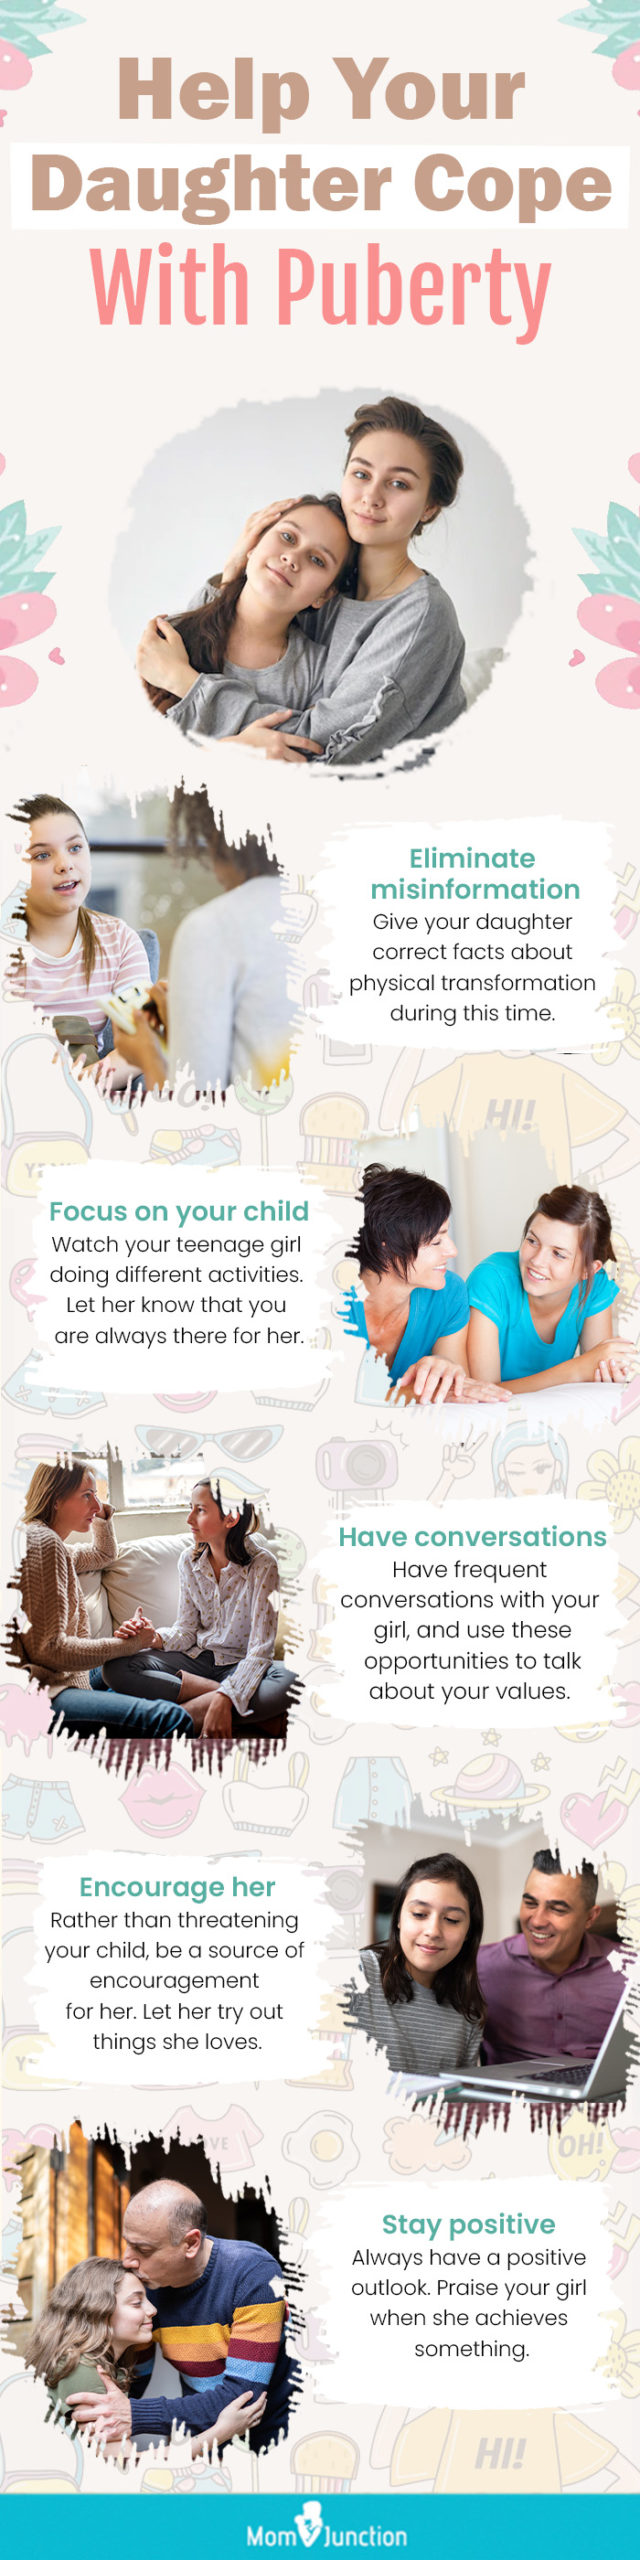 help your daughter cope with puberty (infographic)